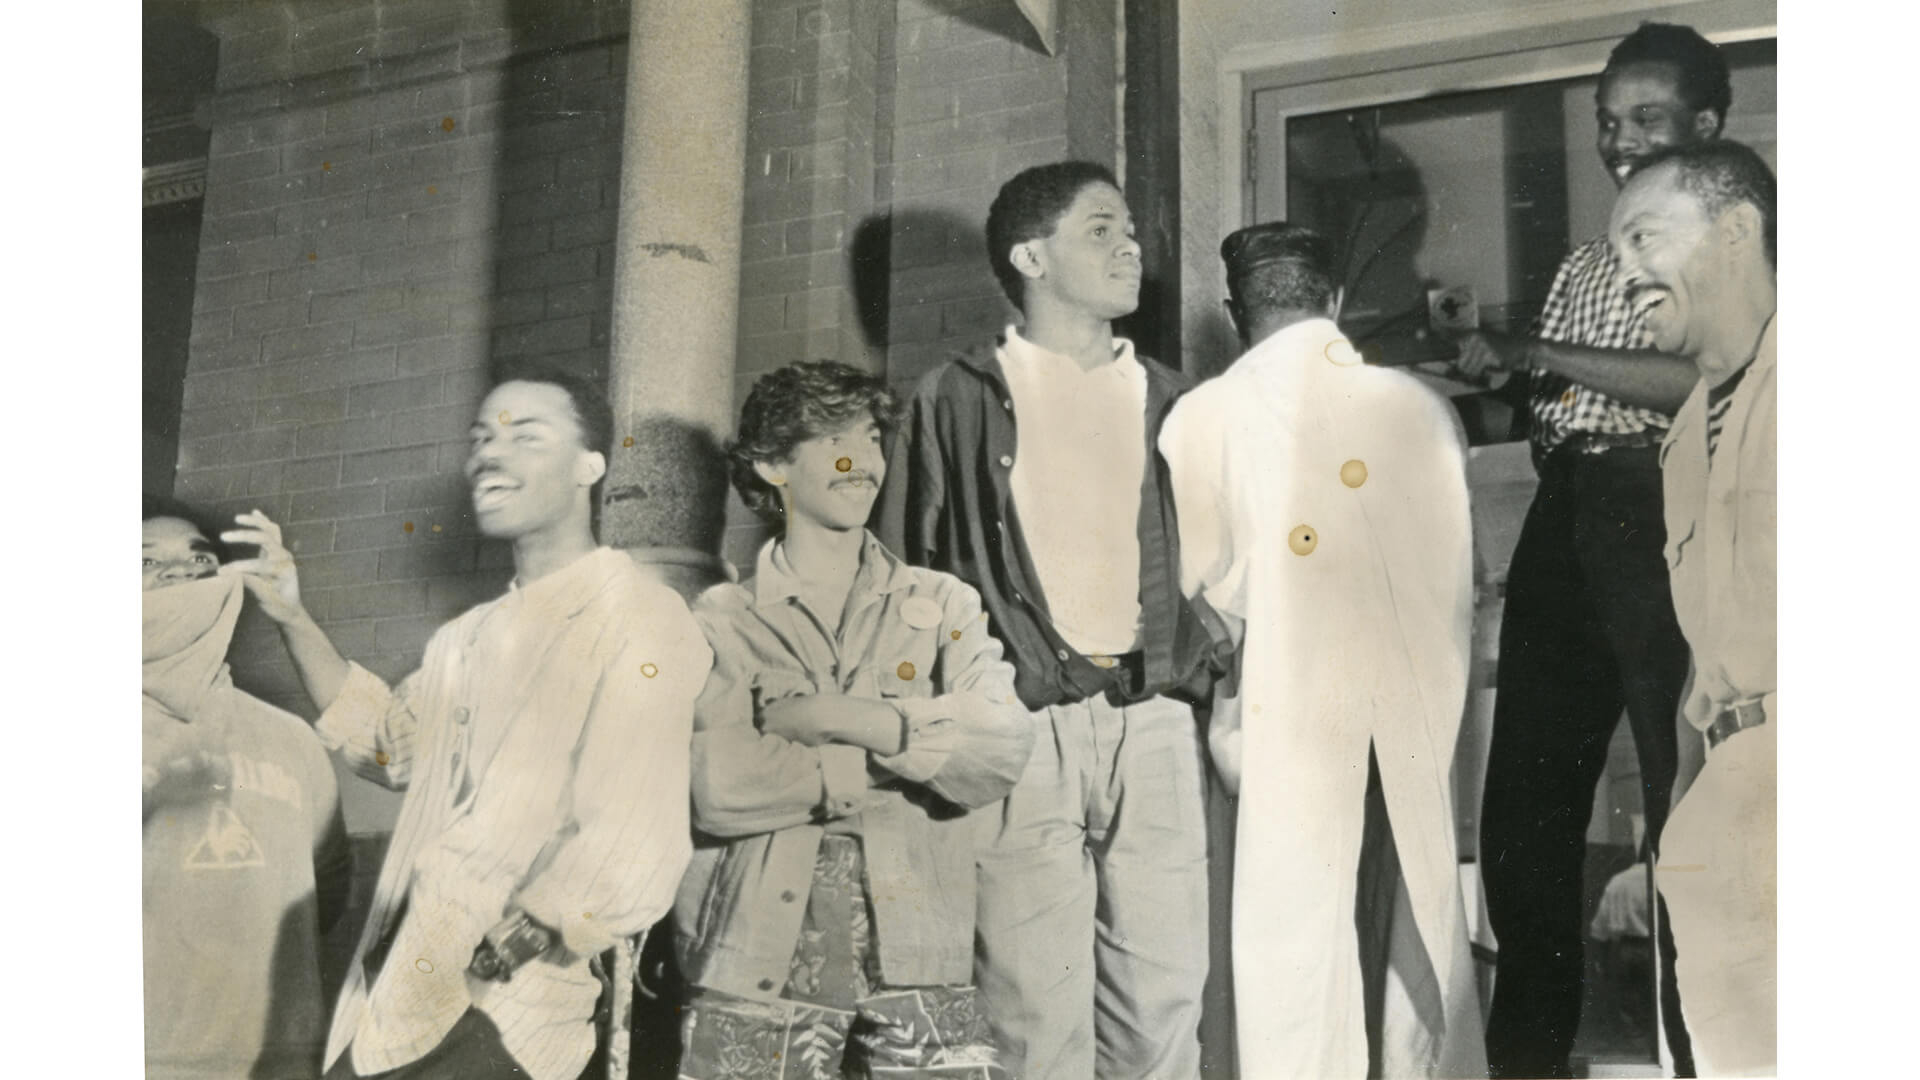 Zami was a lesbian and gay Black and Caribbean group formed in Toronto in the 1980s.